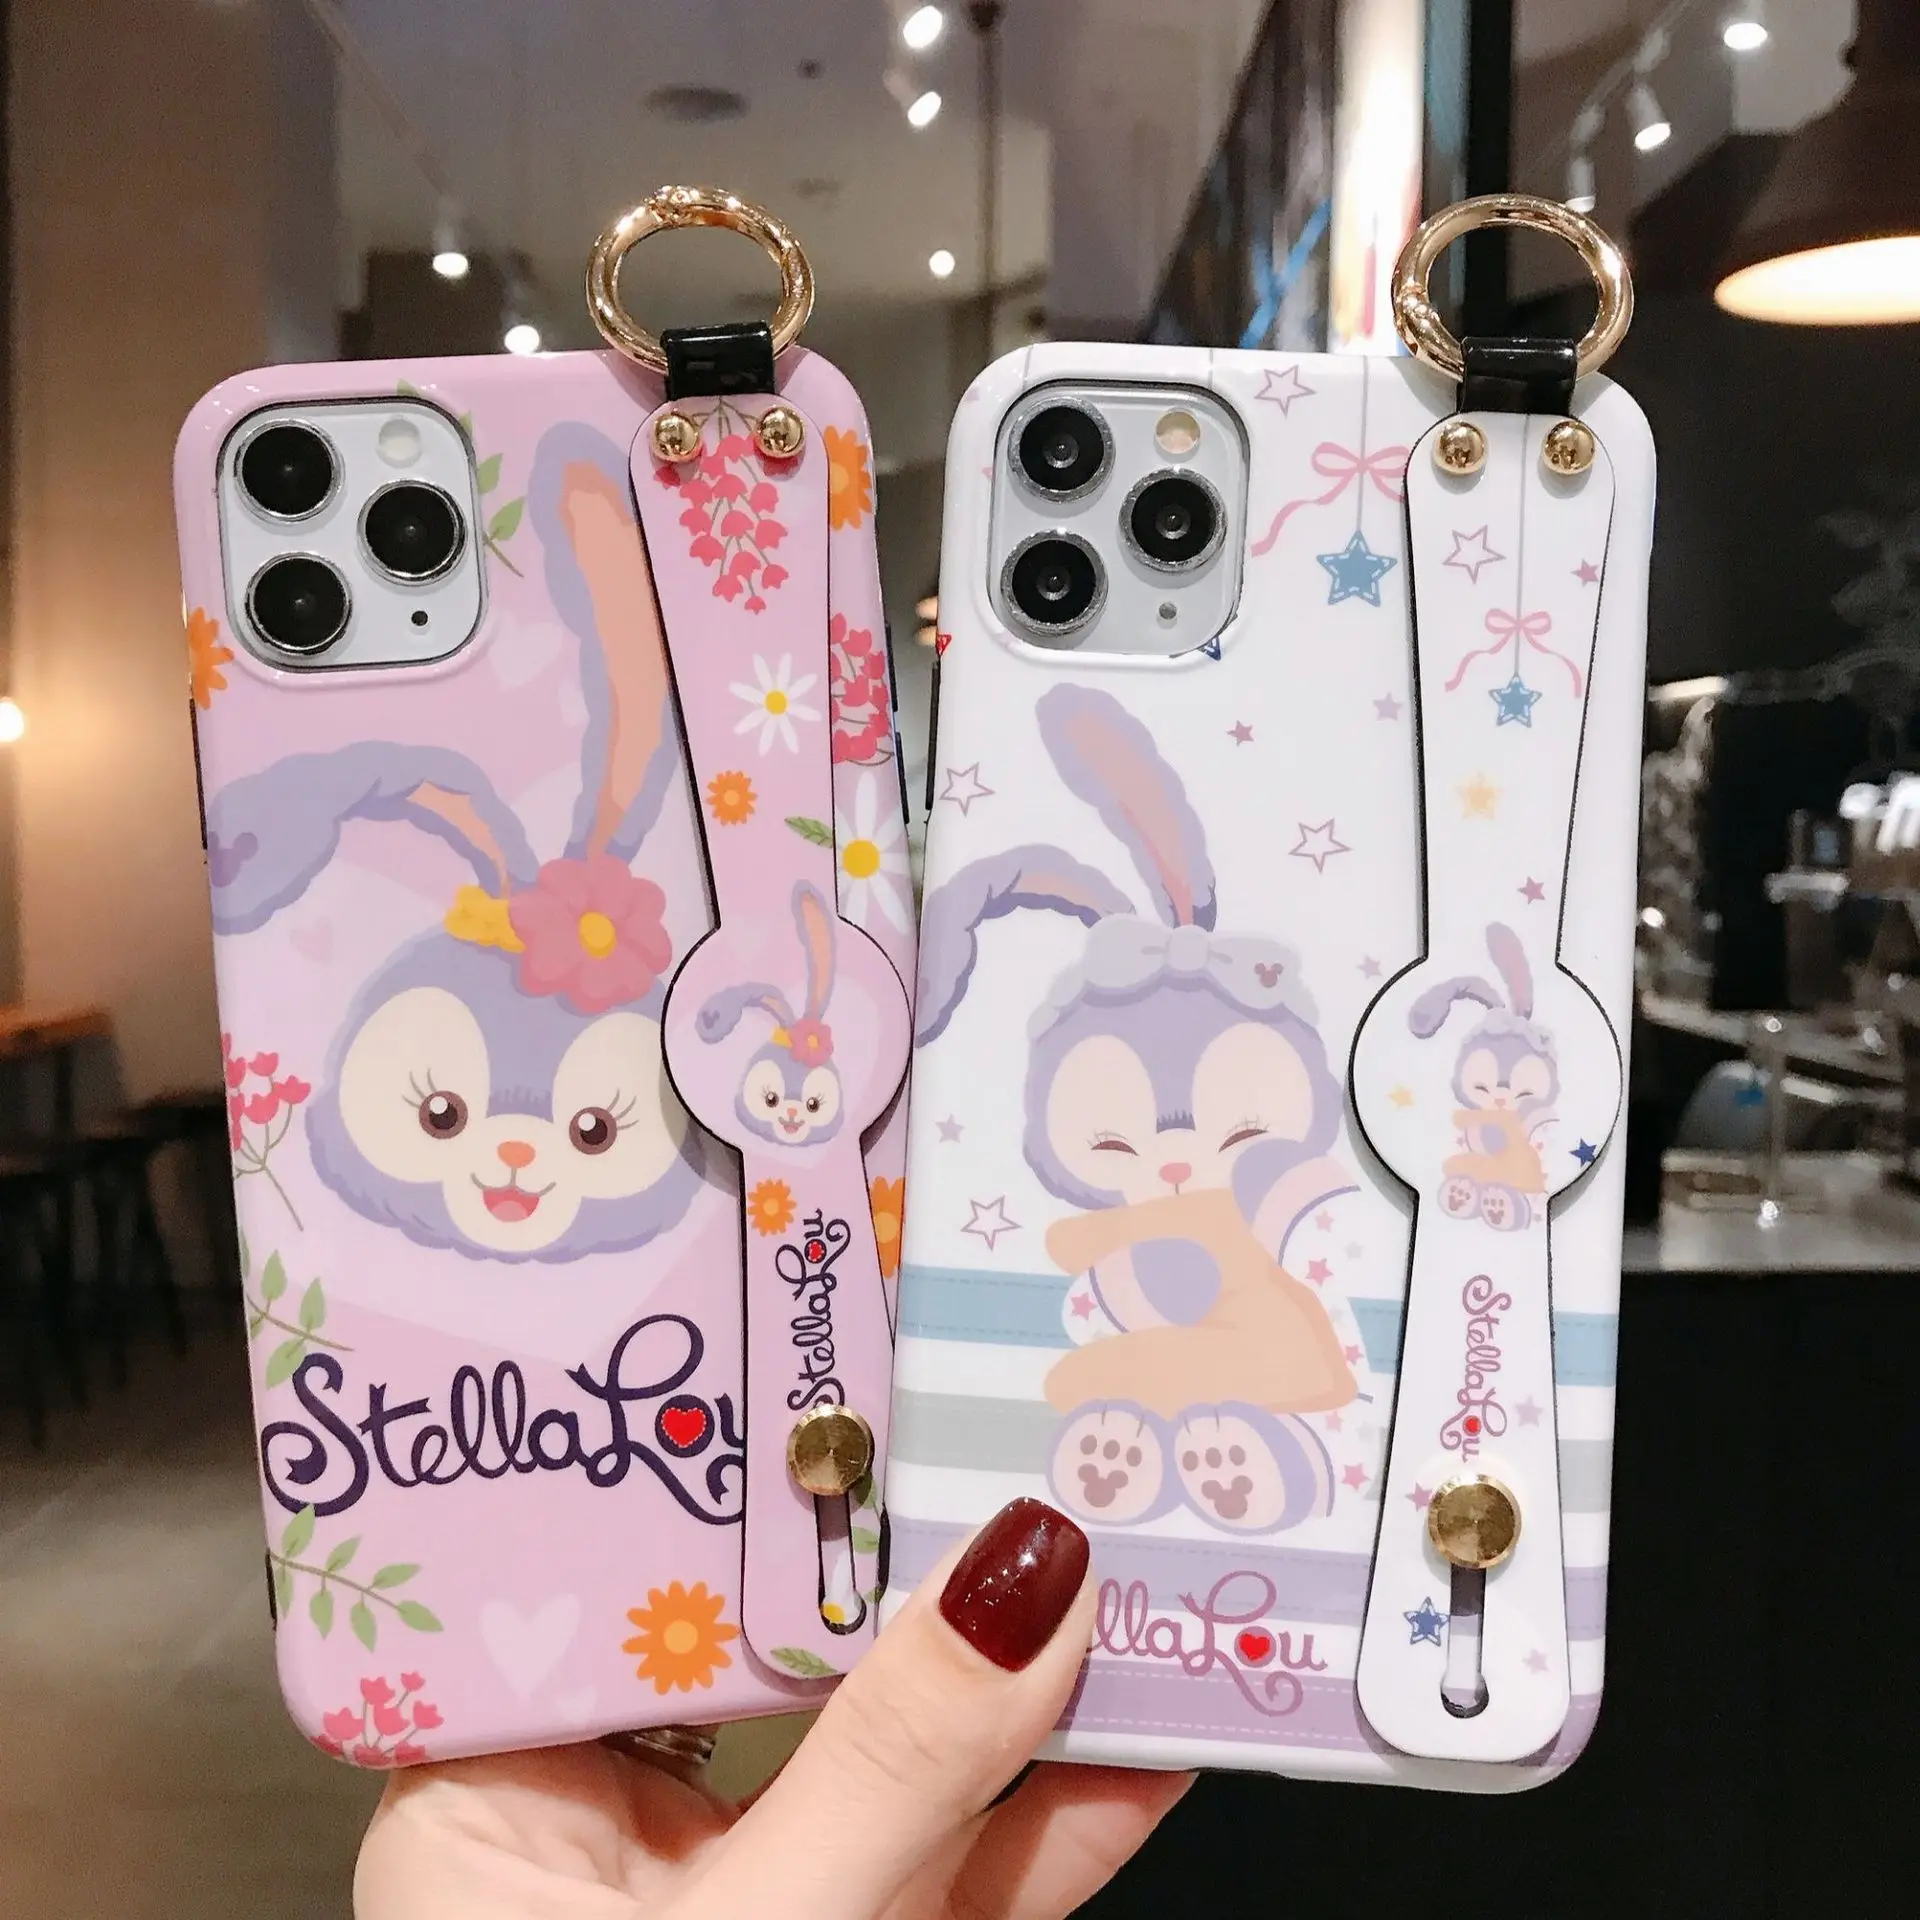 

Cartoon Stellalou Case with strap and band for iPhone 12 Pro Max 11Pro 11 7 8 X XR Xs Max, Colorful